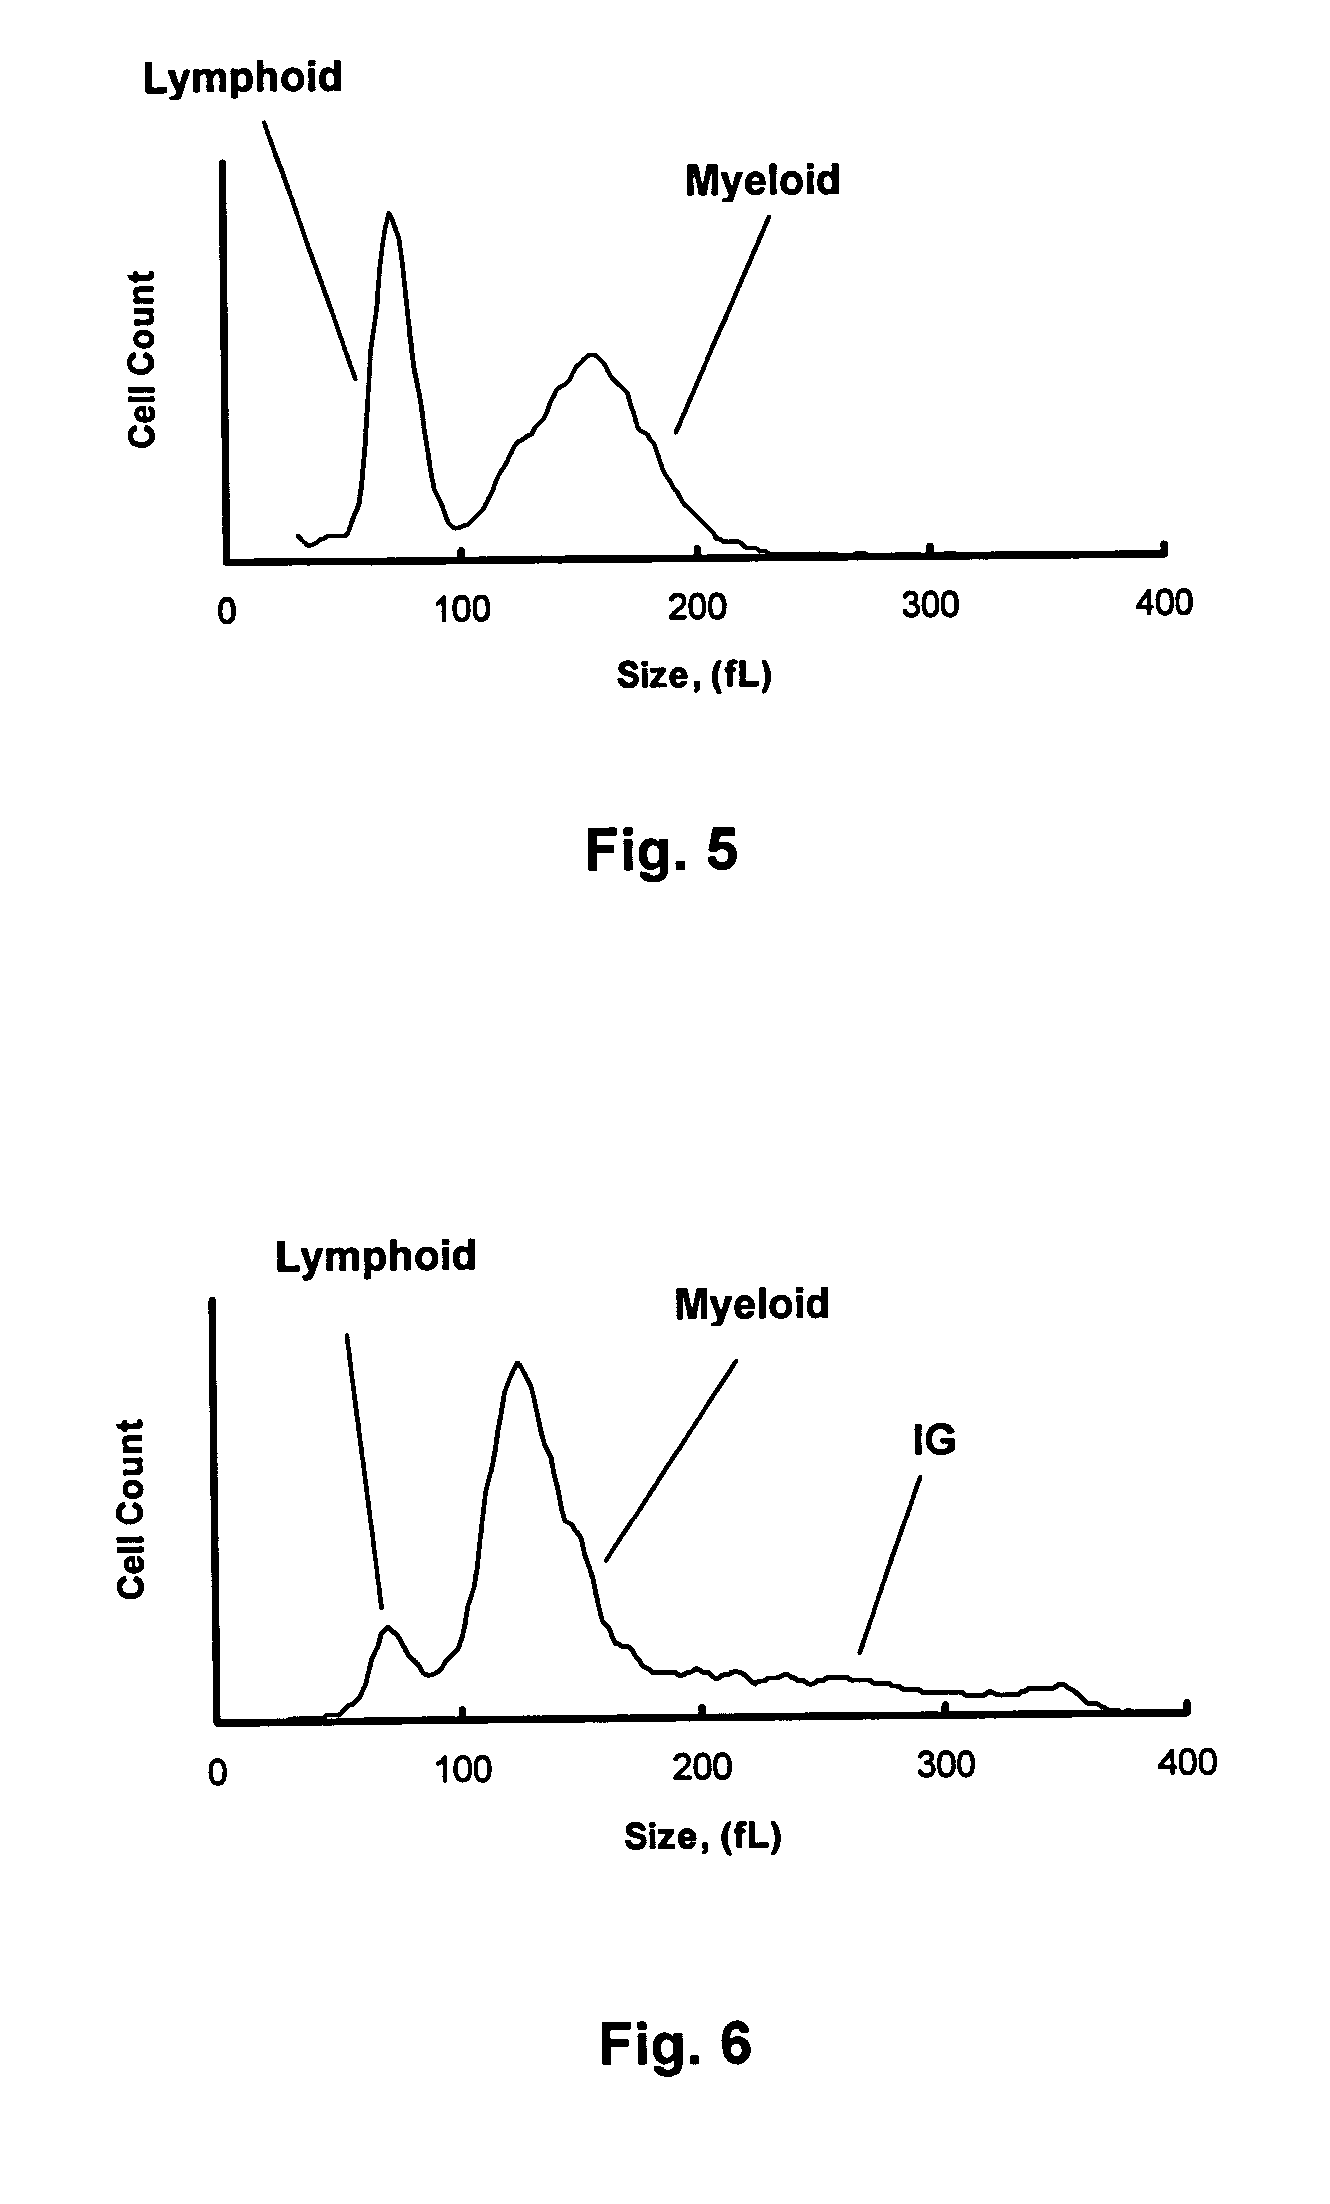 Hematology reference control containing an immature granulocyte component